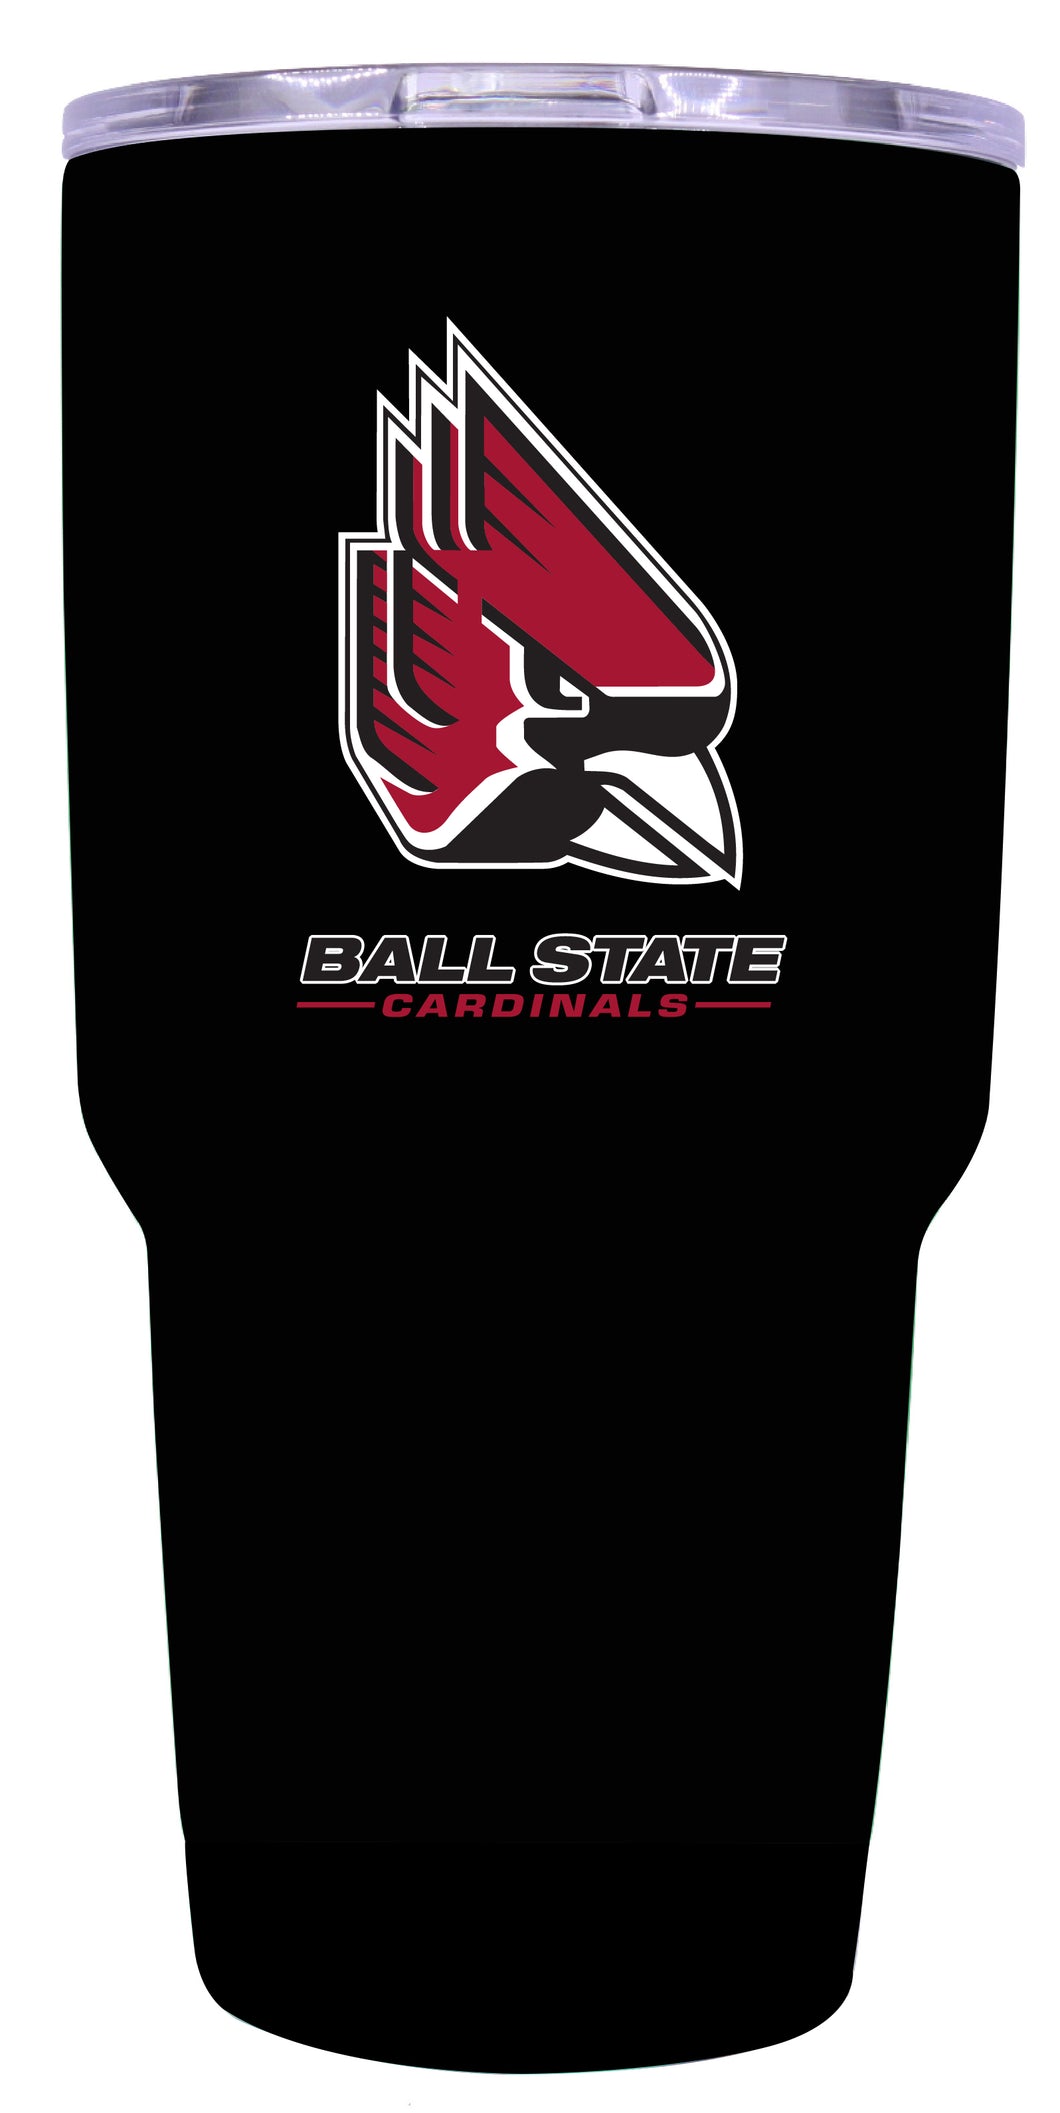 Ball State University Mascot Logo Tumbler - 24oz Color-Choice Insulated Stainless Steel Mug